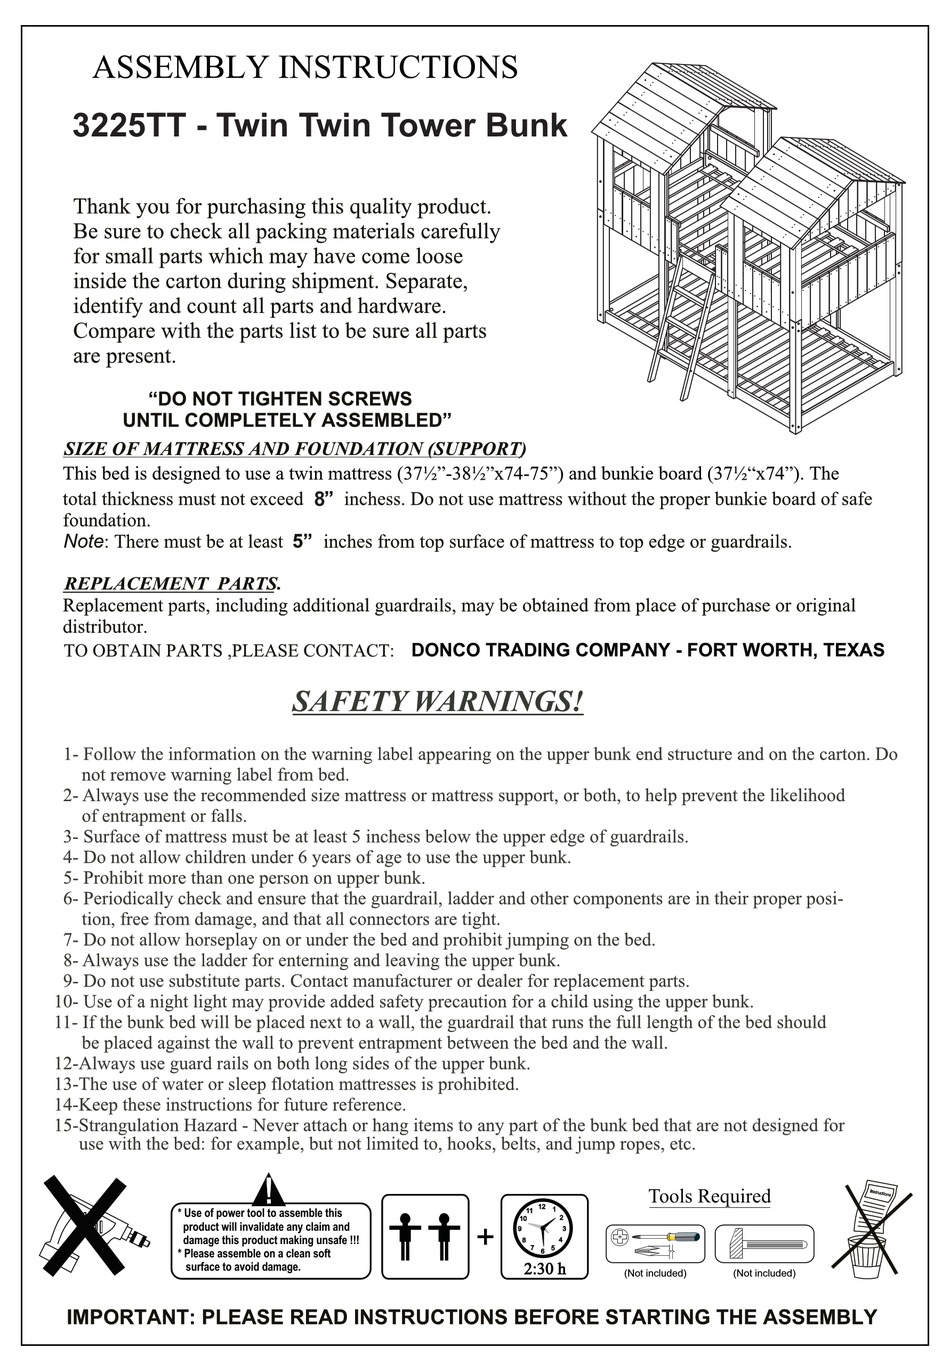 Donco 3225tt Assembly Instructions, Donco Bunk Bed Assembly Instructions